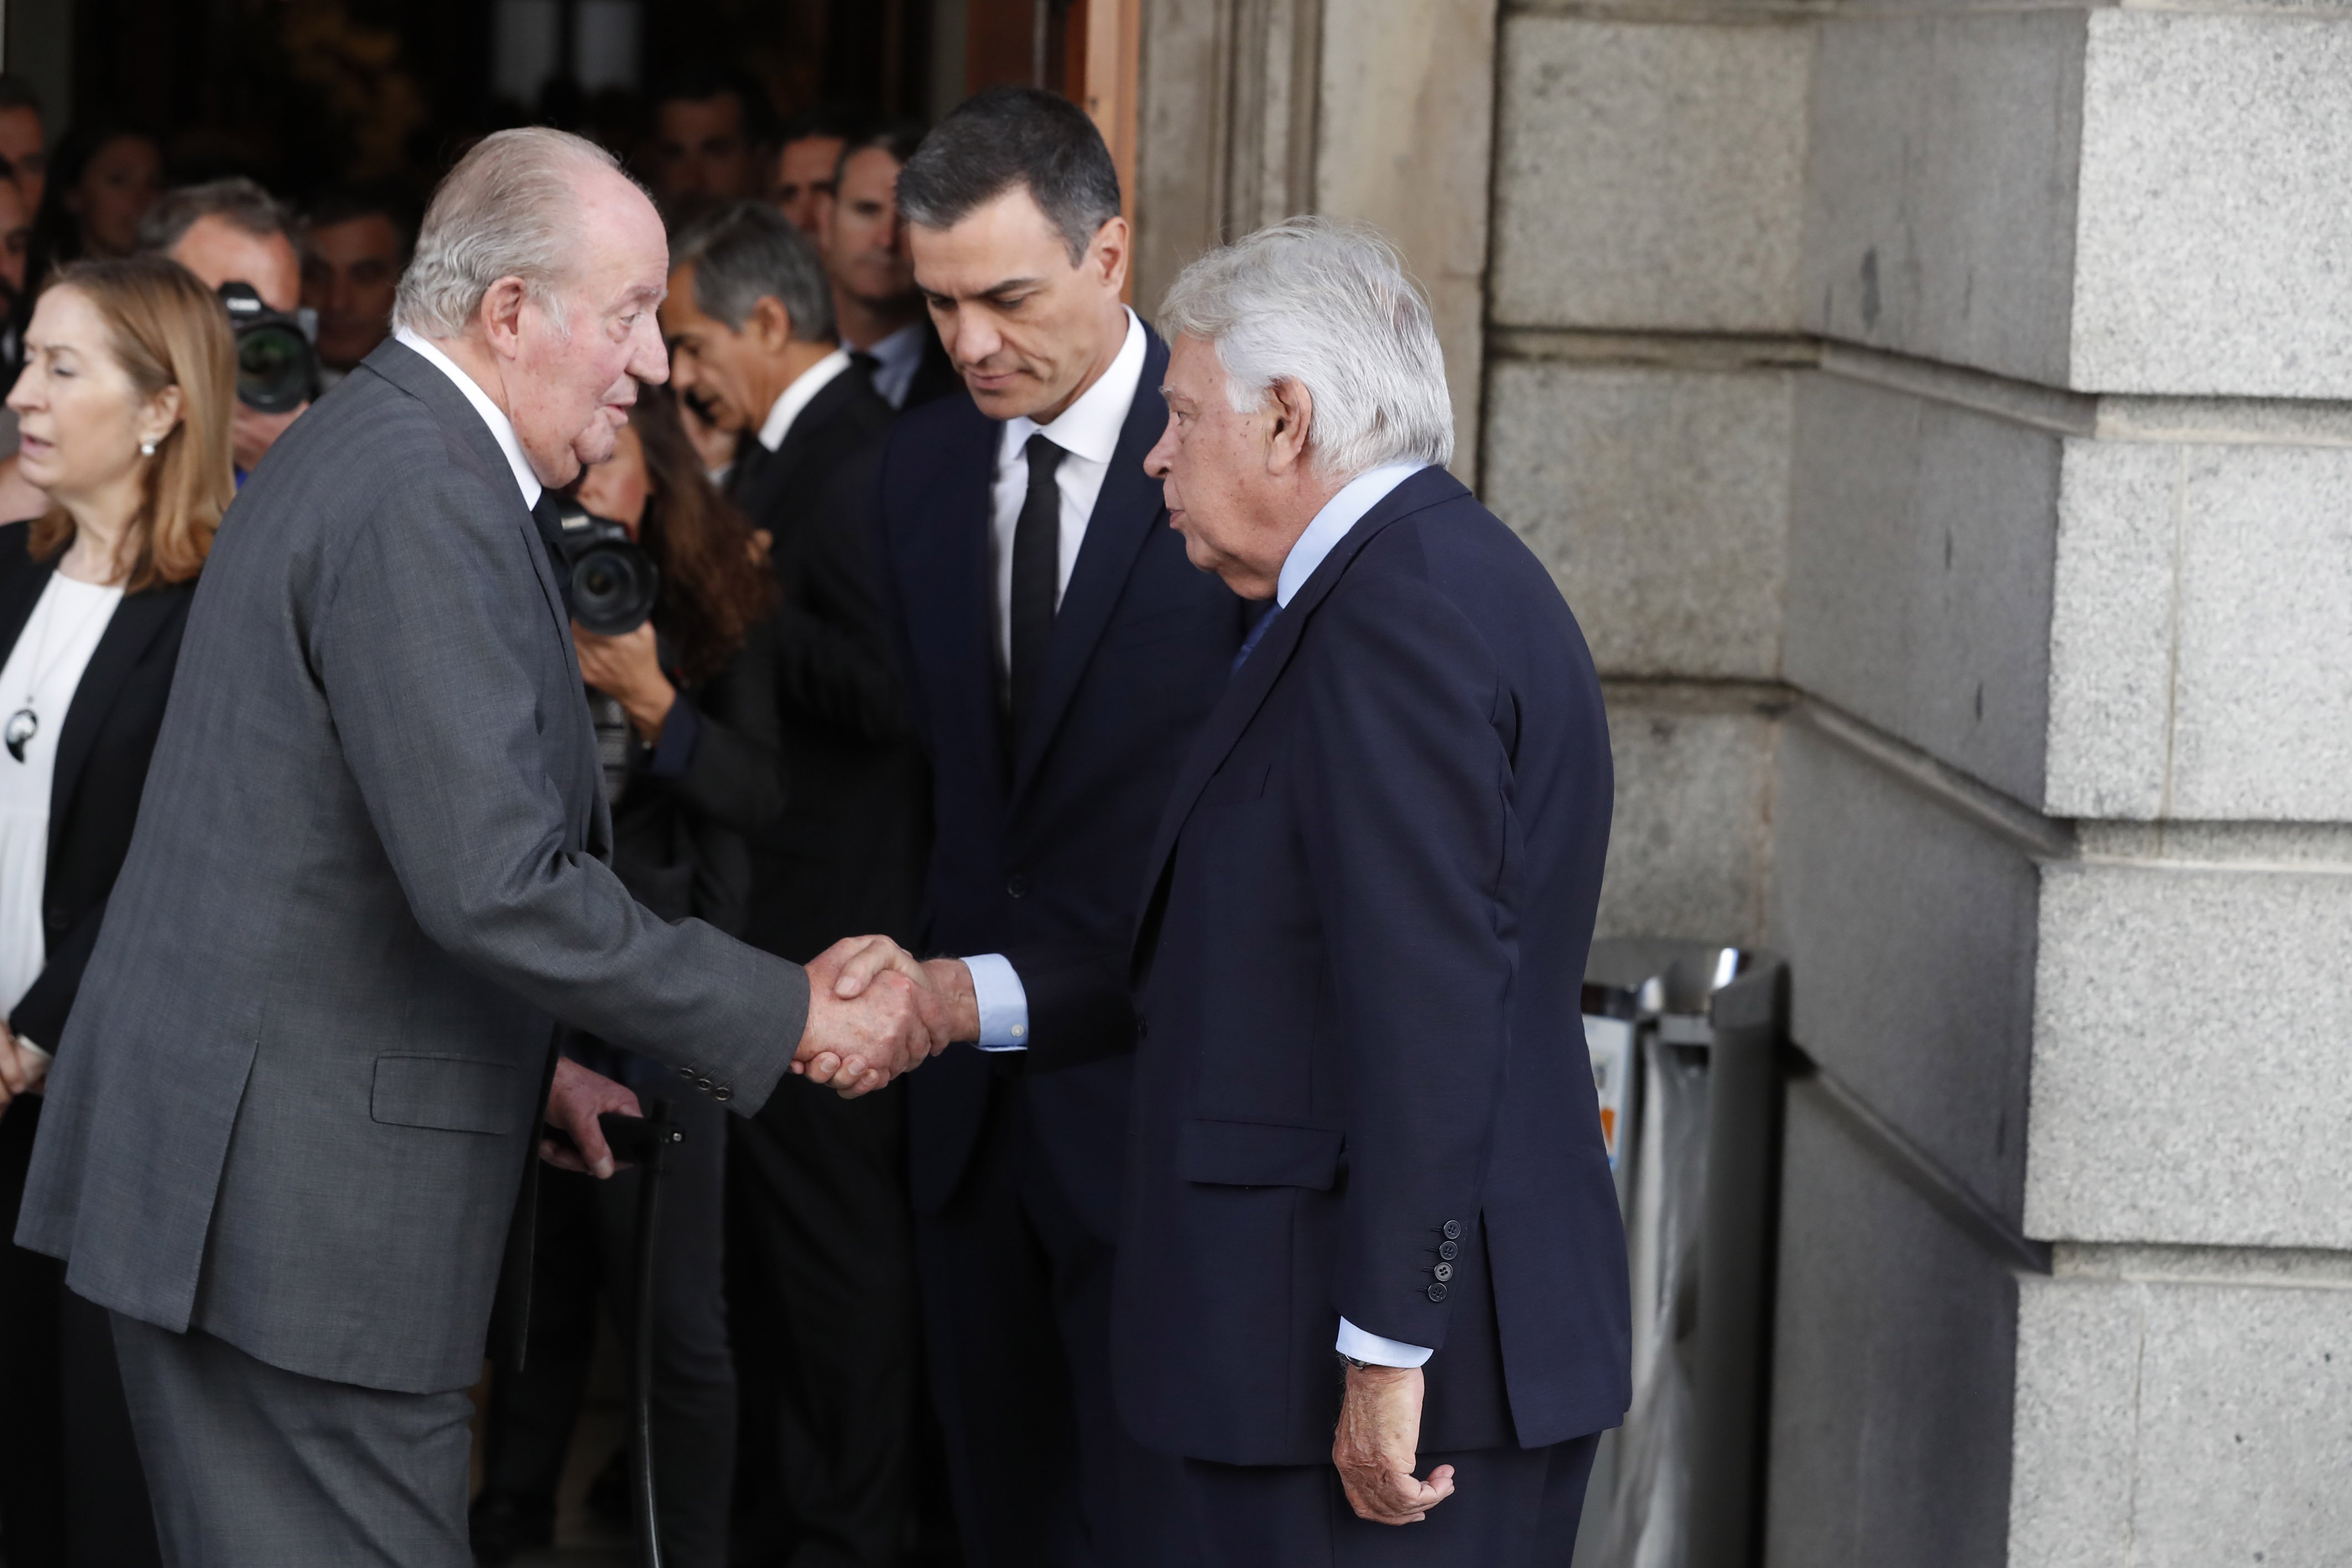 Juan Carlos I is fleeing from Spanish justice, say Catalan politicians